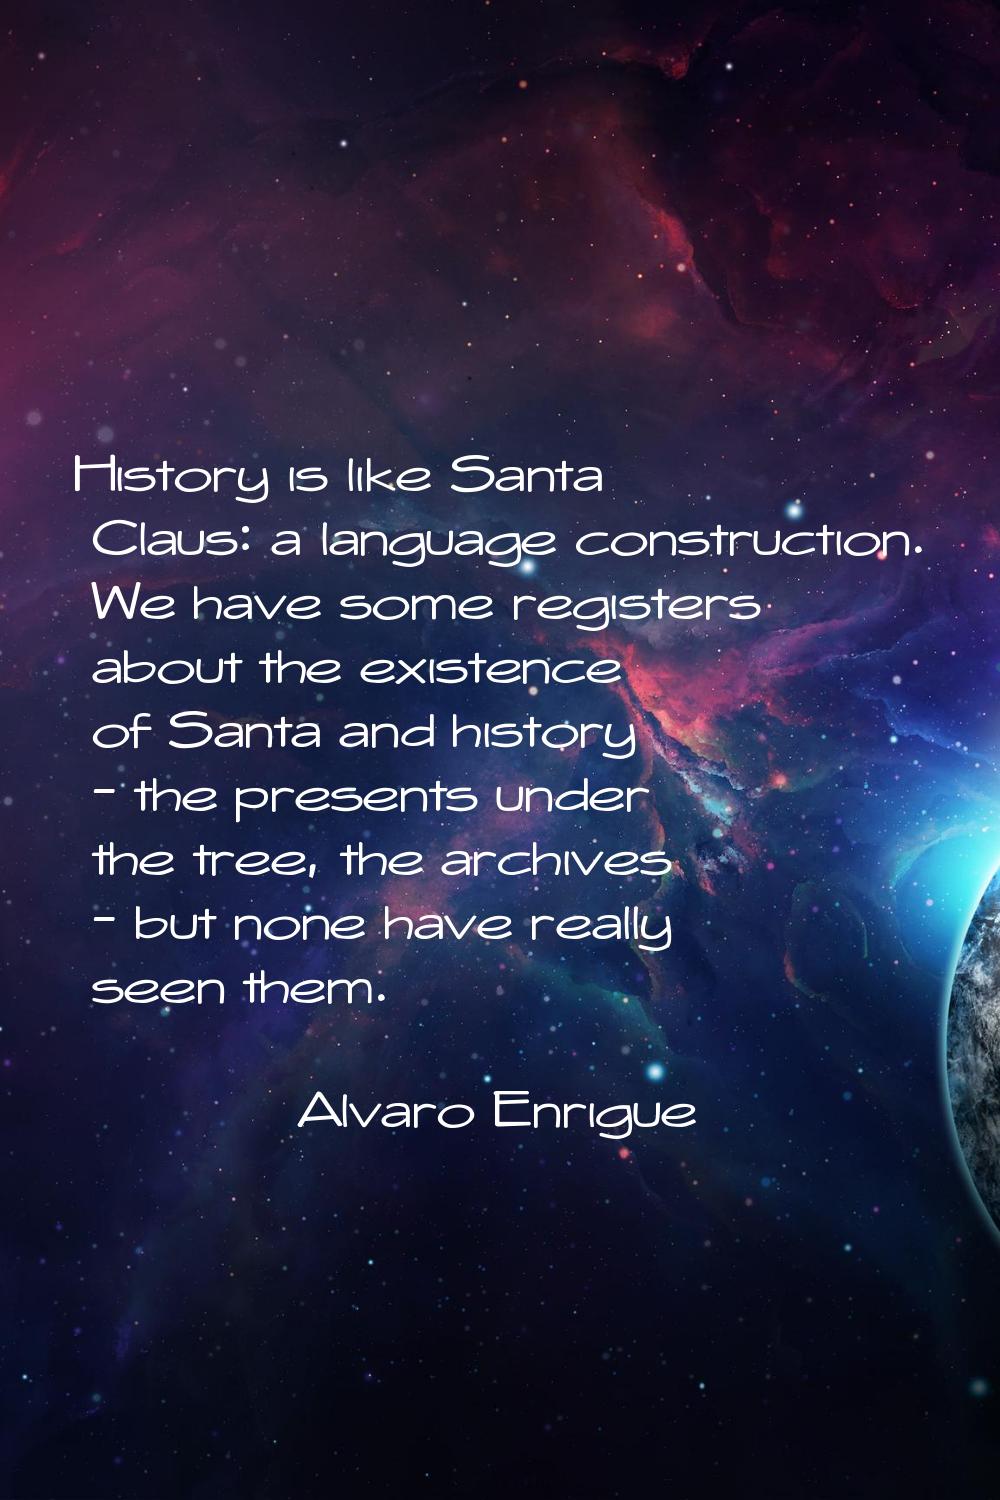 History is like Santa Claus: a language construction. We have some registers about the existence of